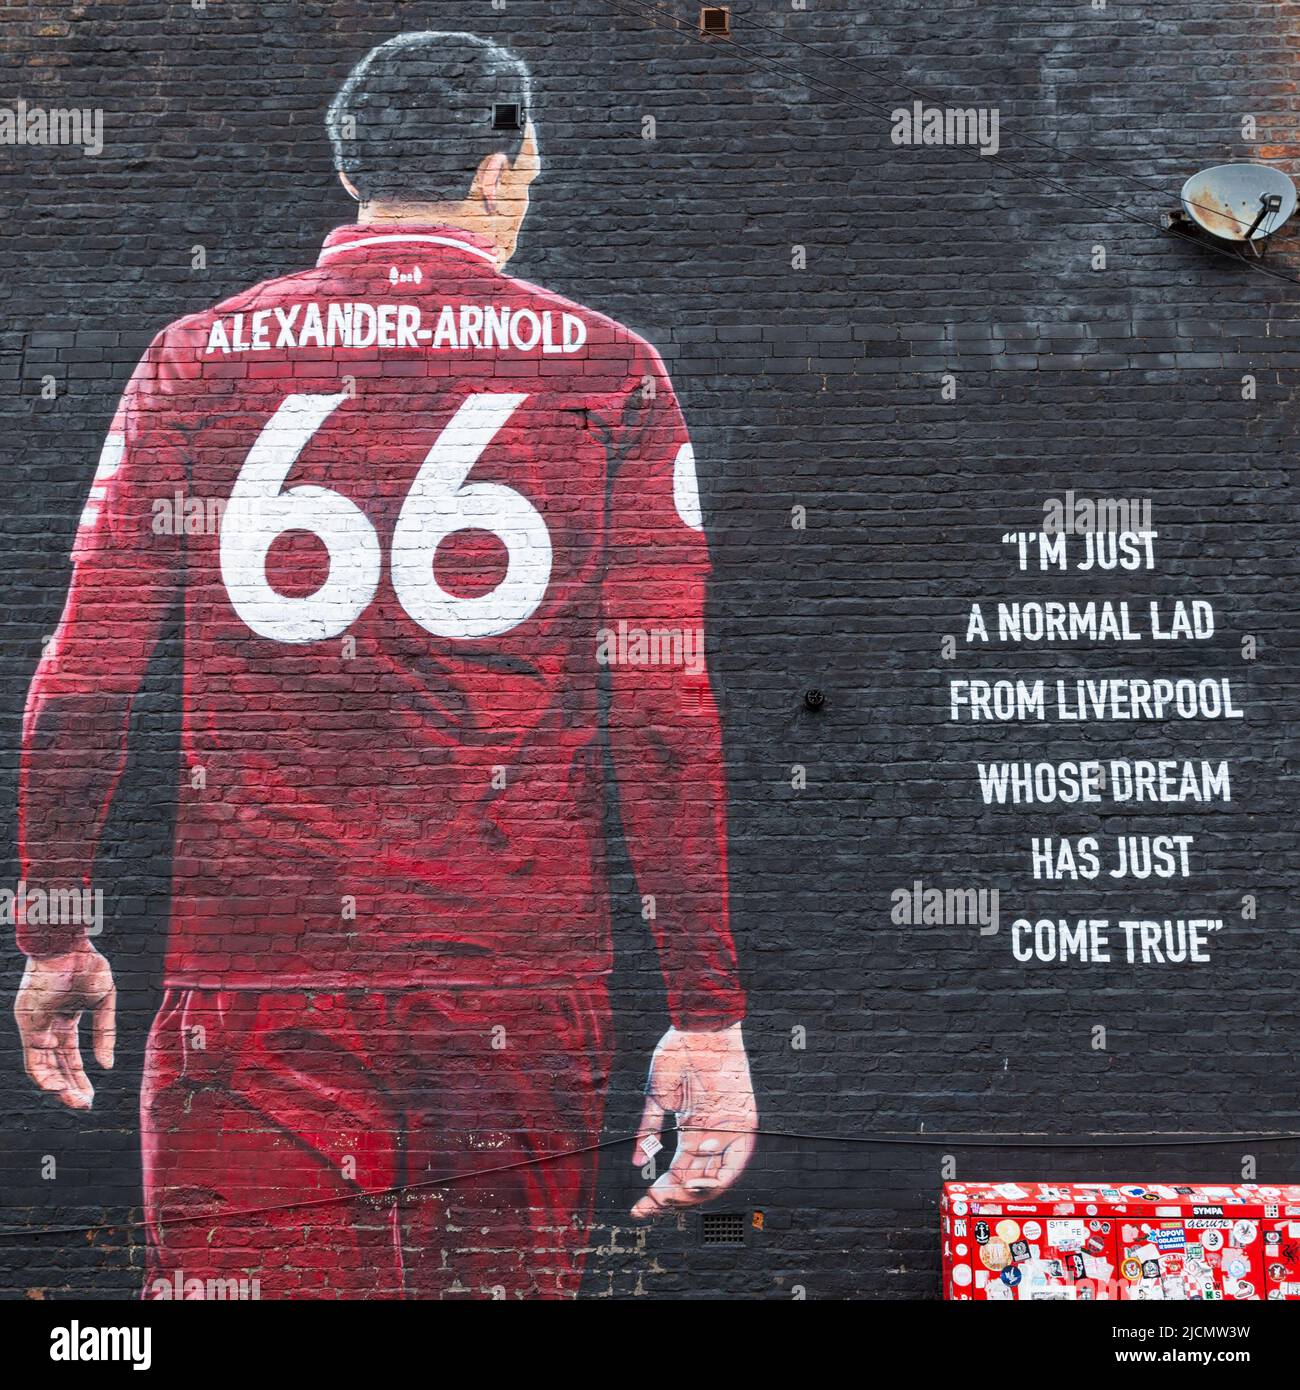 Trent Alexander-Arnold fresque, Liverpool FC Street art, Anfield, Liverpool, Angleterre, Royaume-Uni Banque D'Images